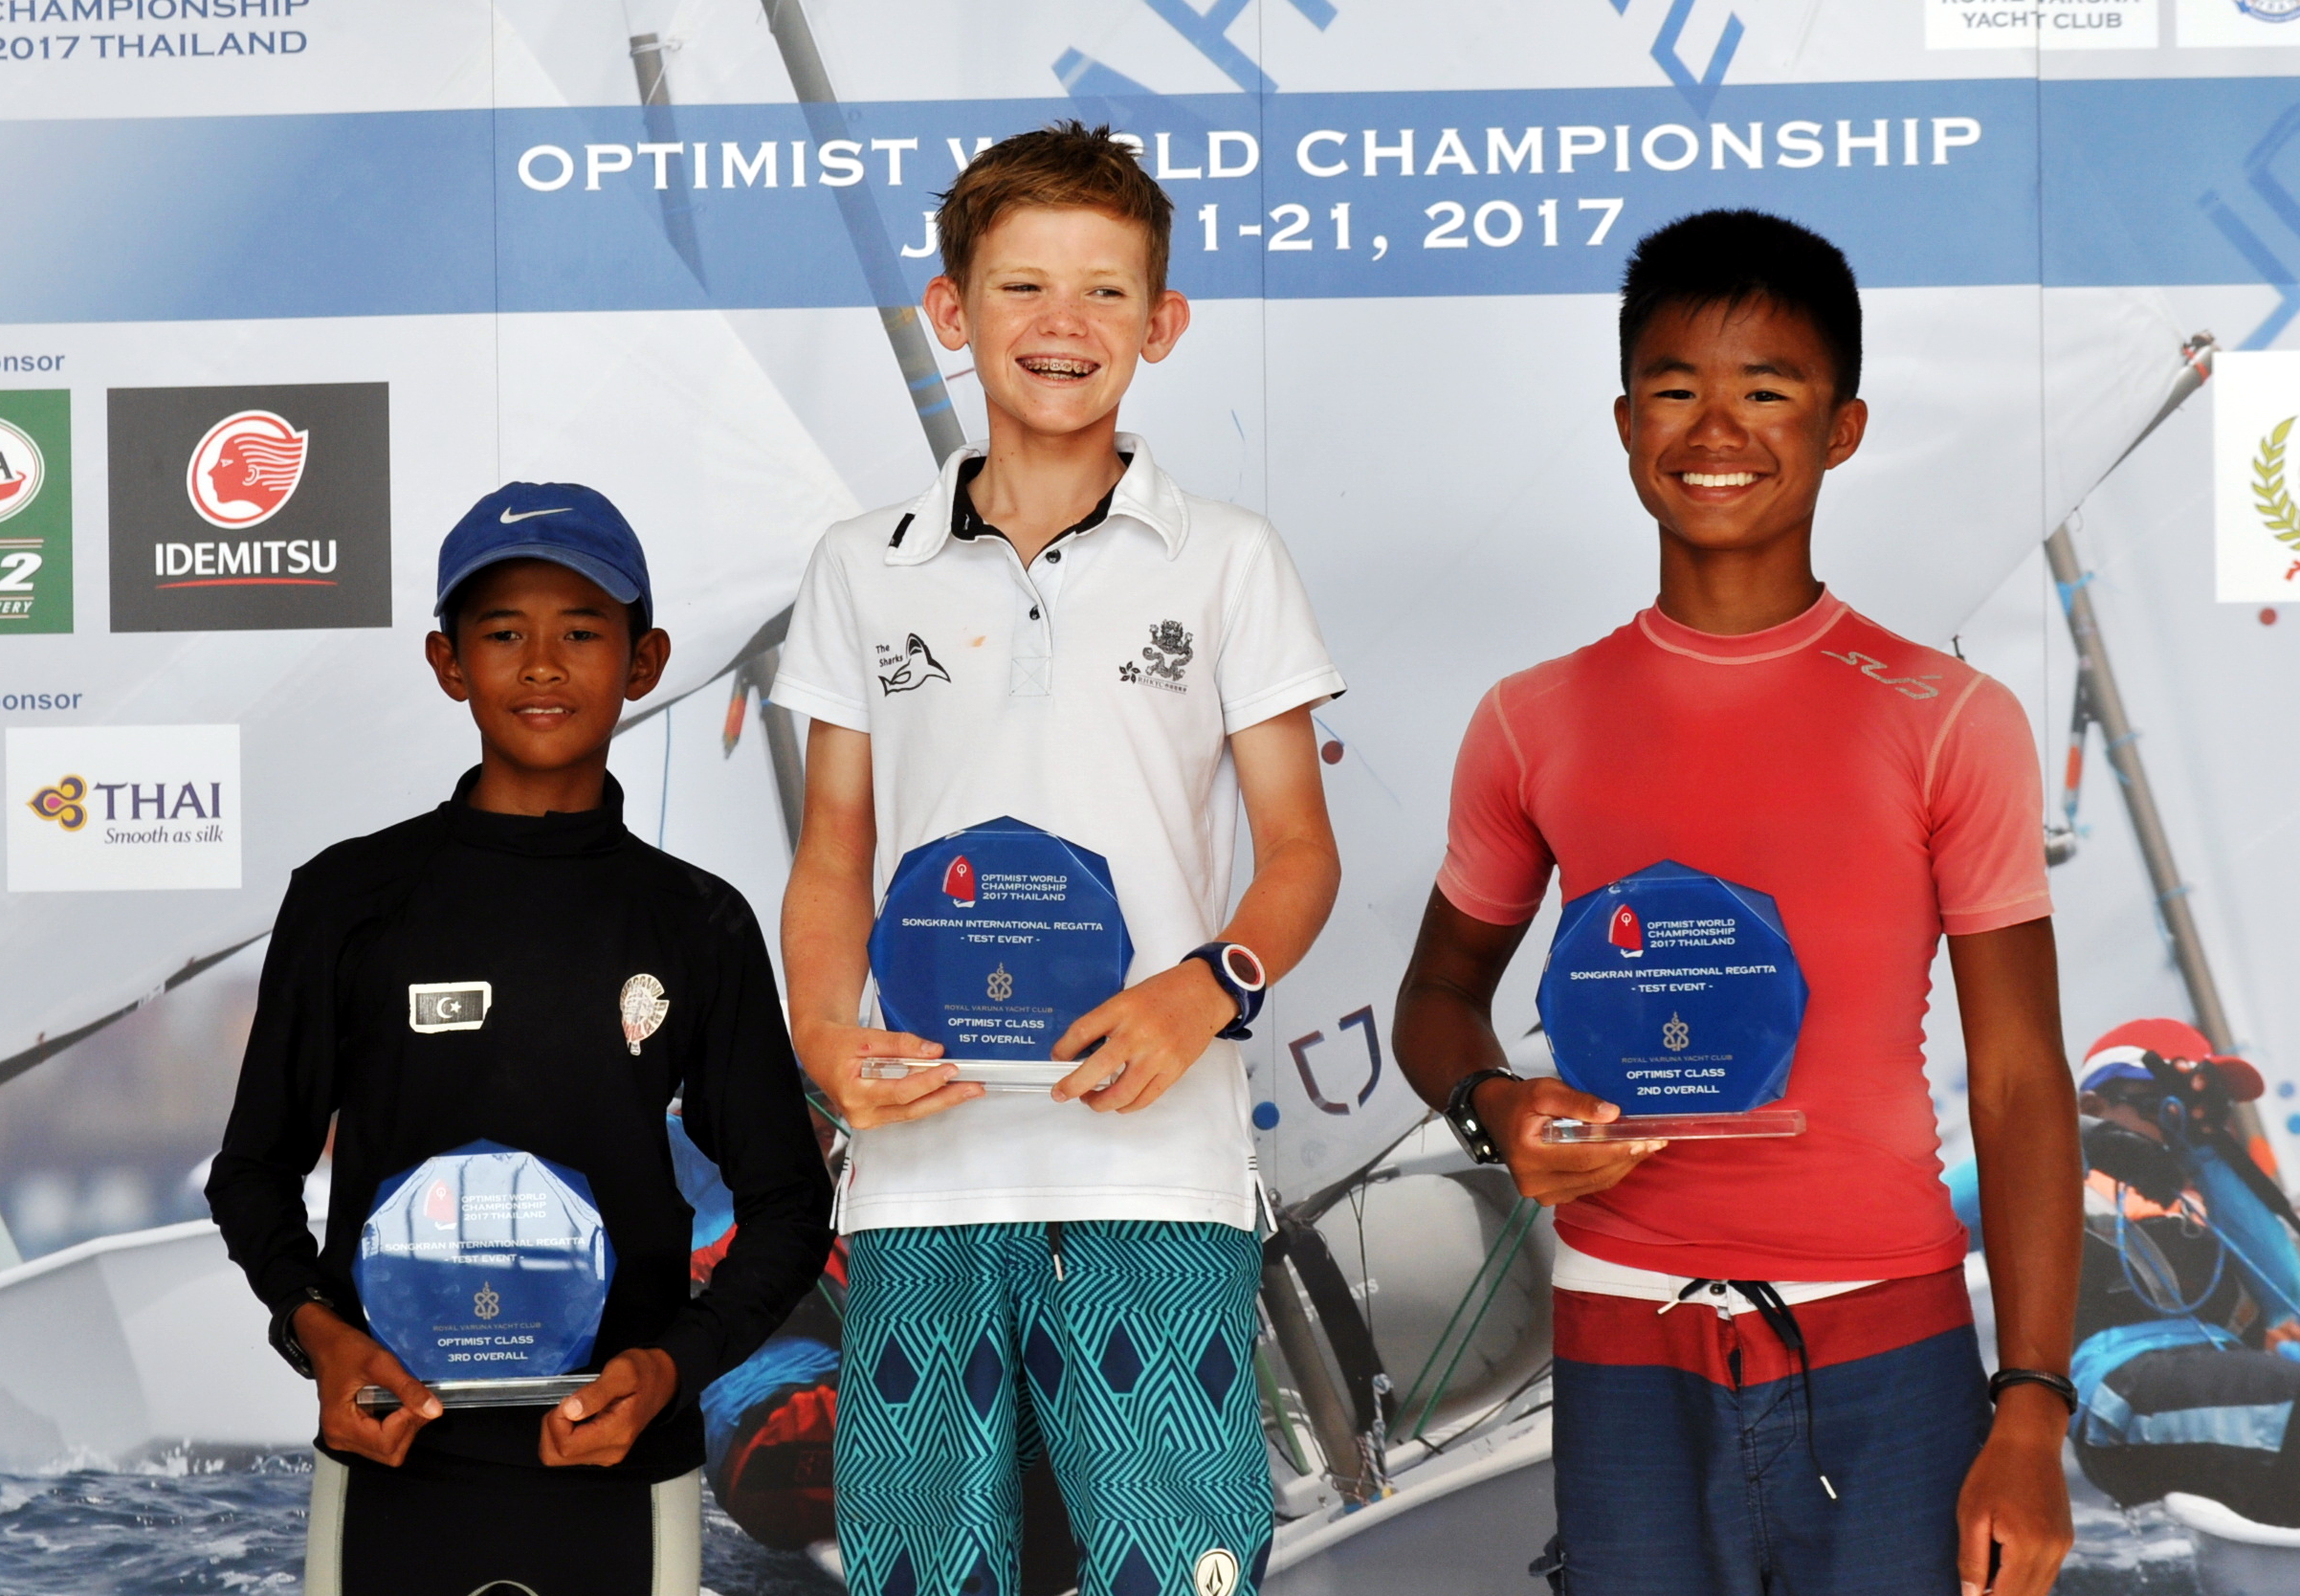 Individual winner Duncan Gregor of Hong Kong (centre) poses on the podium with Muhammed Khaidir Bin Mohd Zahawi from Malaysia (left) and Muhammad Daniel Kei, representing Singapore (right).